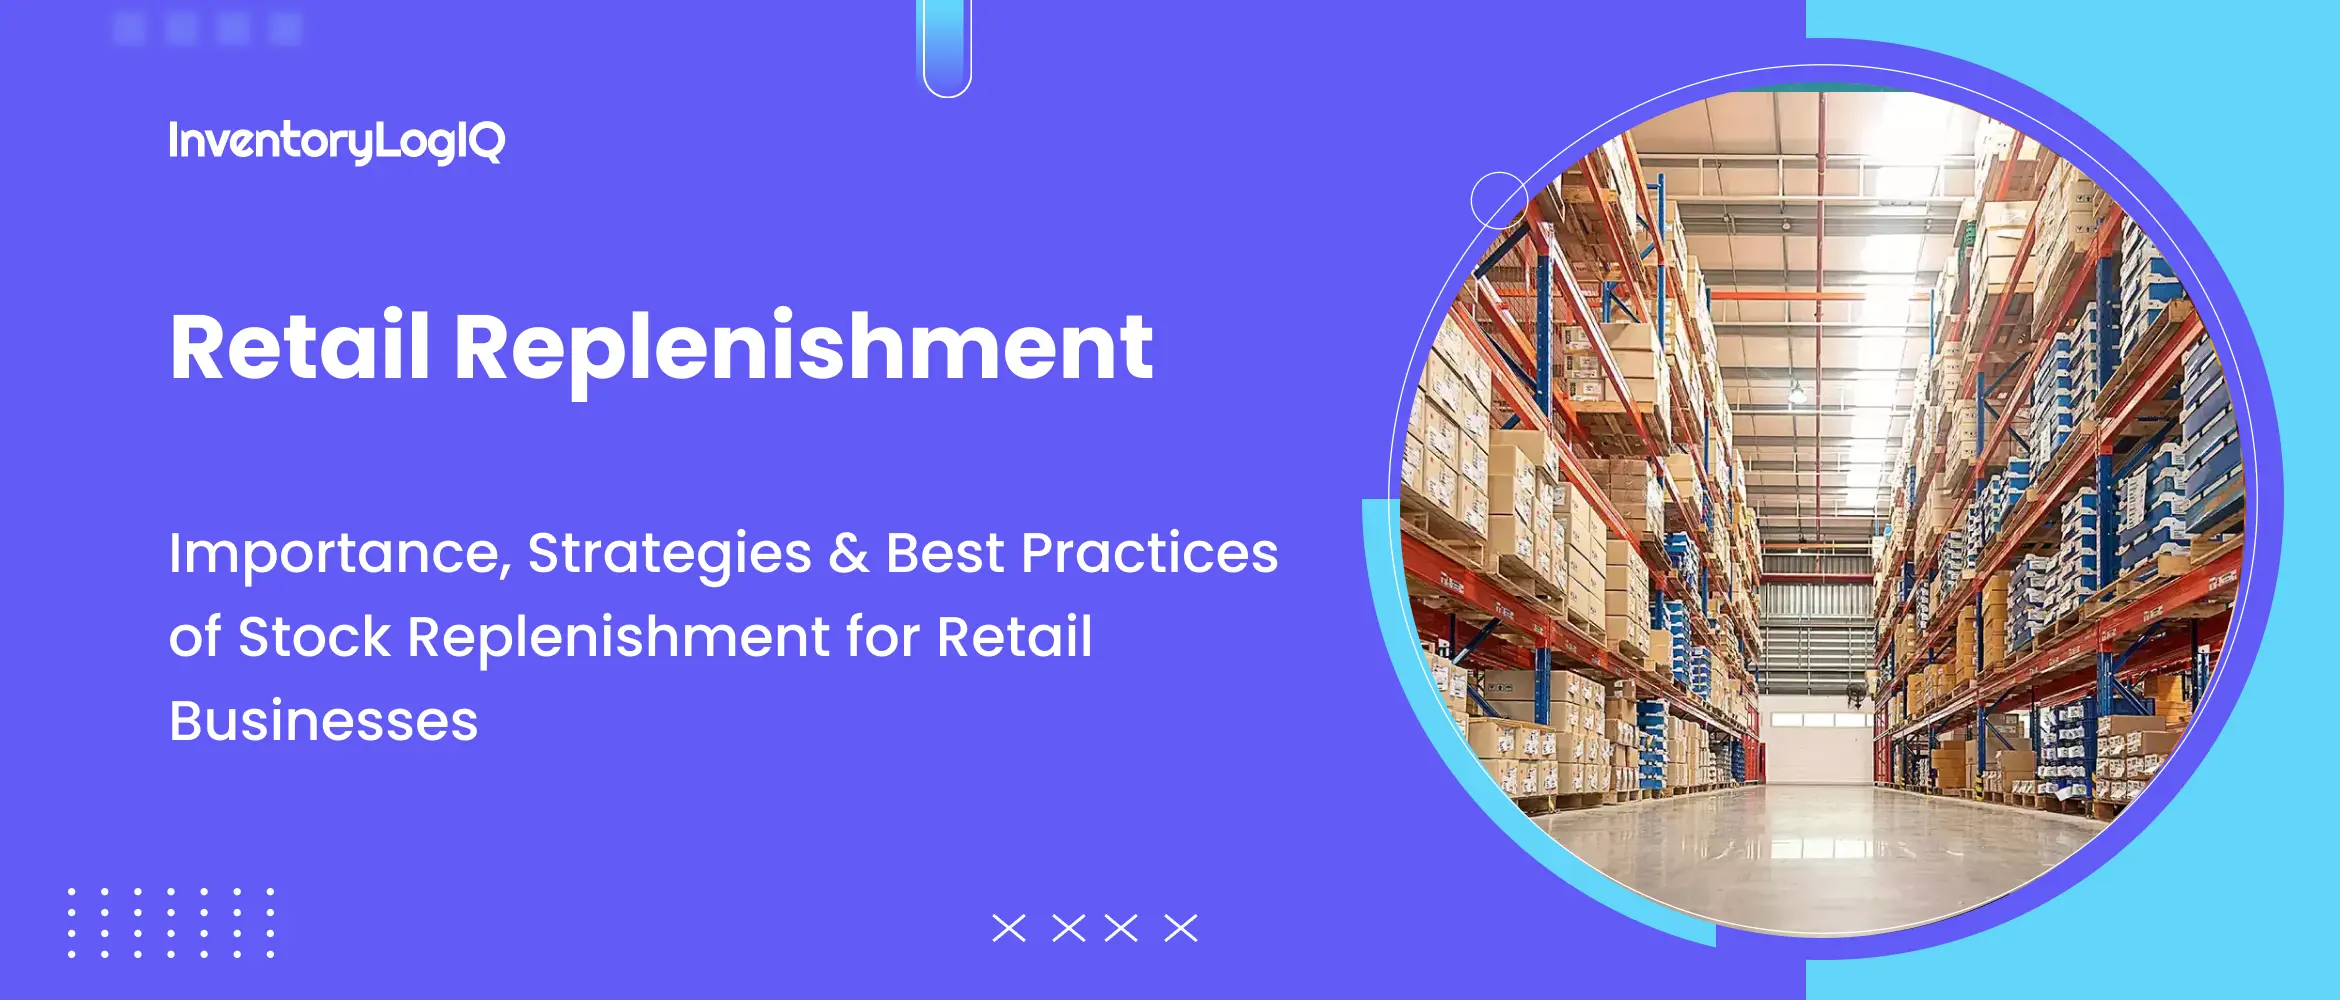 Retail Replenishment: Importance, Strategies & Best Practices of Stock Replenishment for Retail Businesses in 2023